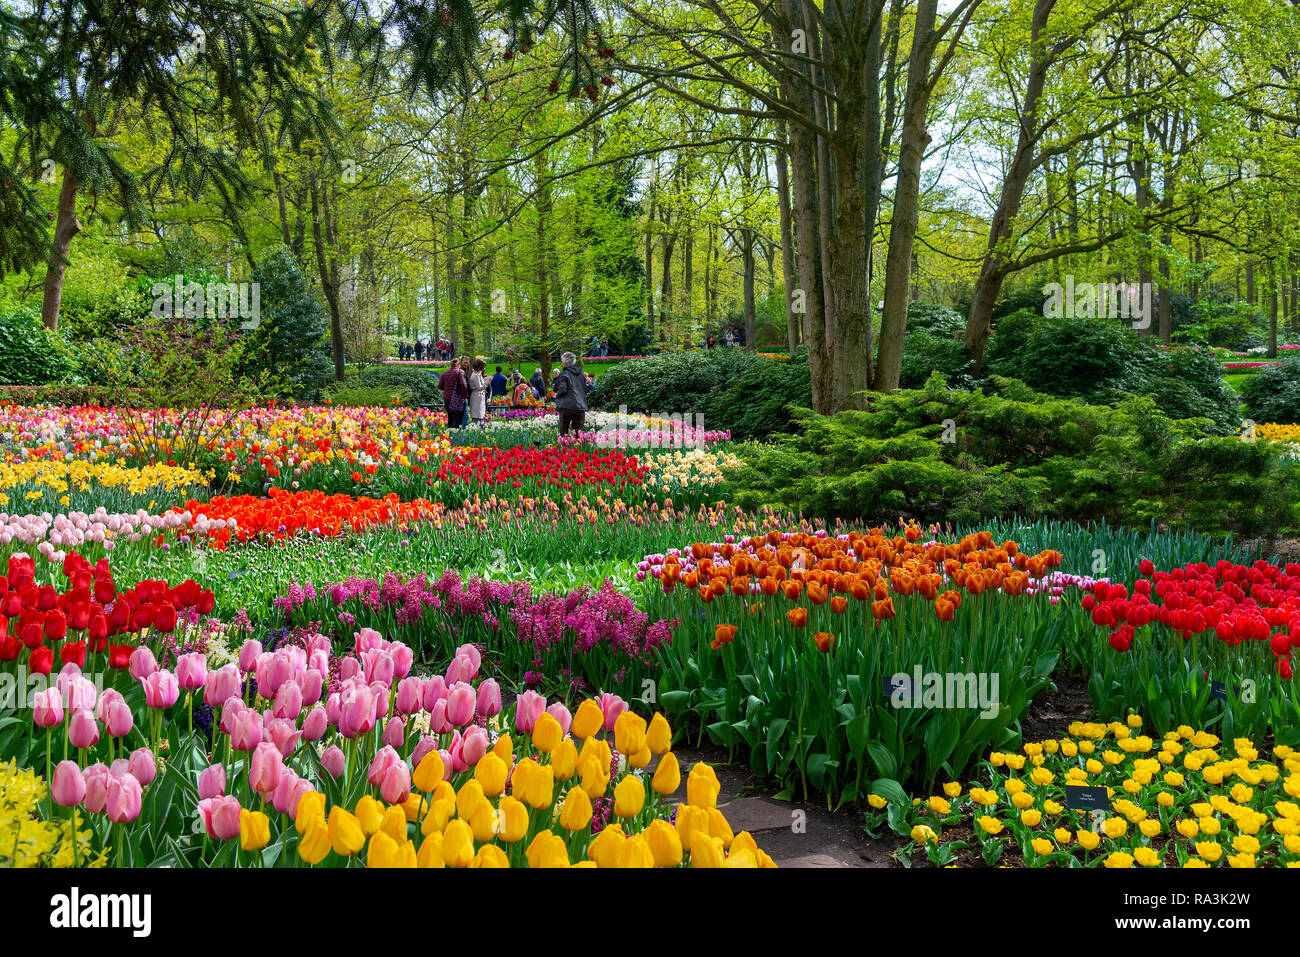 spectacular display of spring flowering bulbs at the world's largest